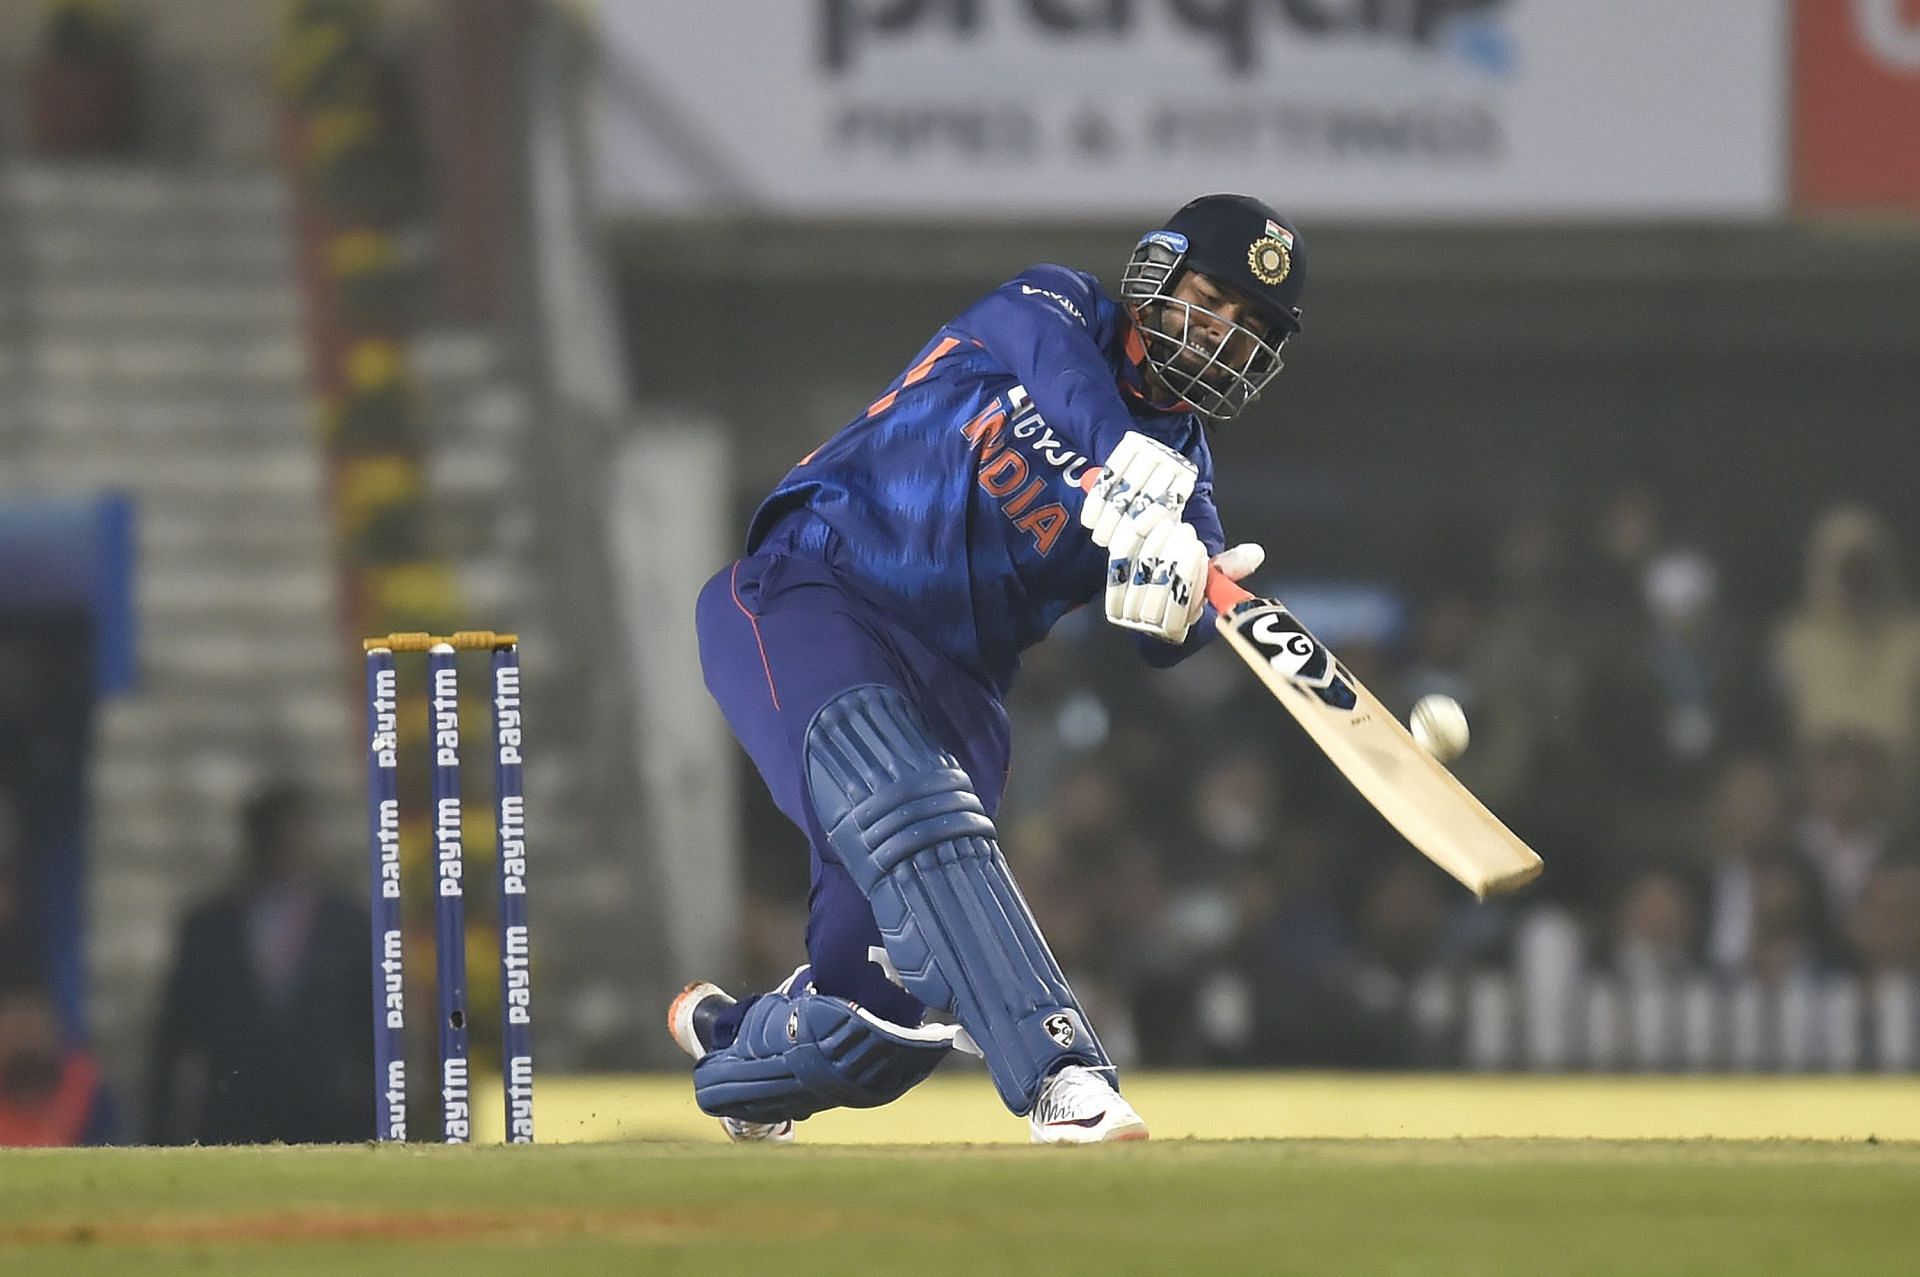 IND vs ENG: Rishabh Pant to be AXED from India's T20 team? Aakash Chopra claims 'he has THROWN away many opportunities, should not be in PLAYING XI'